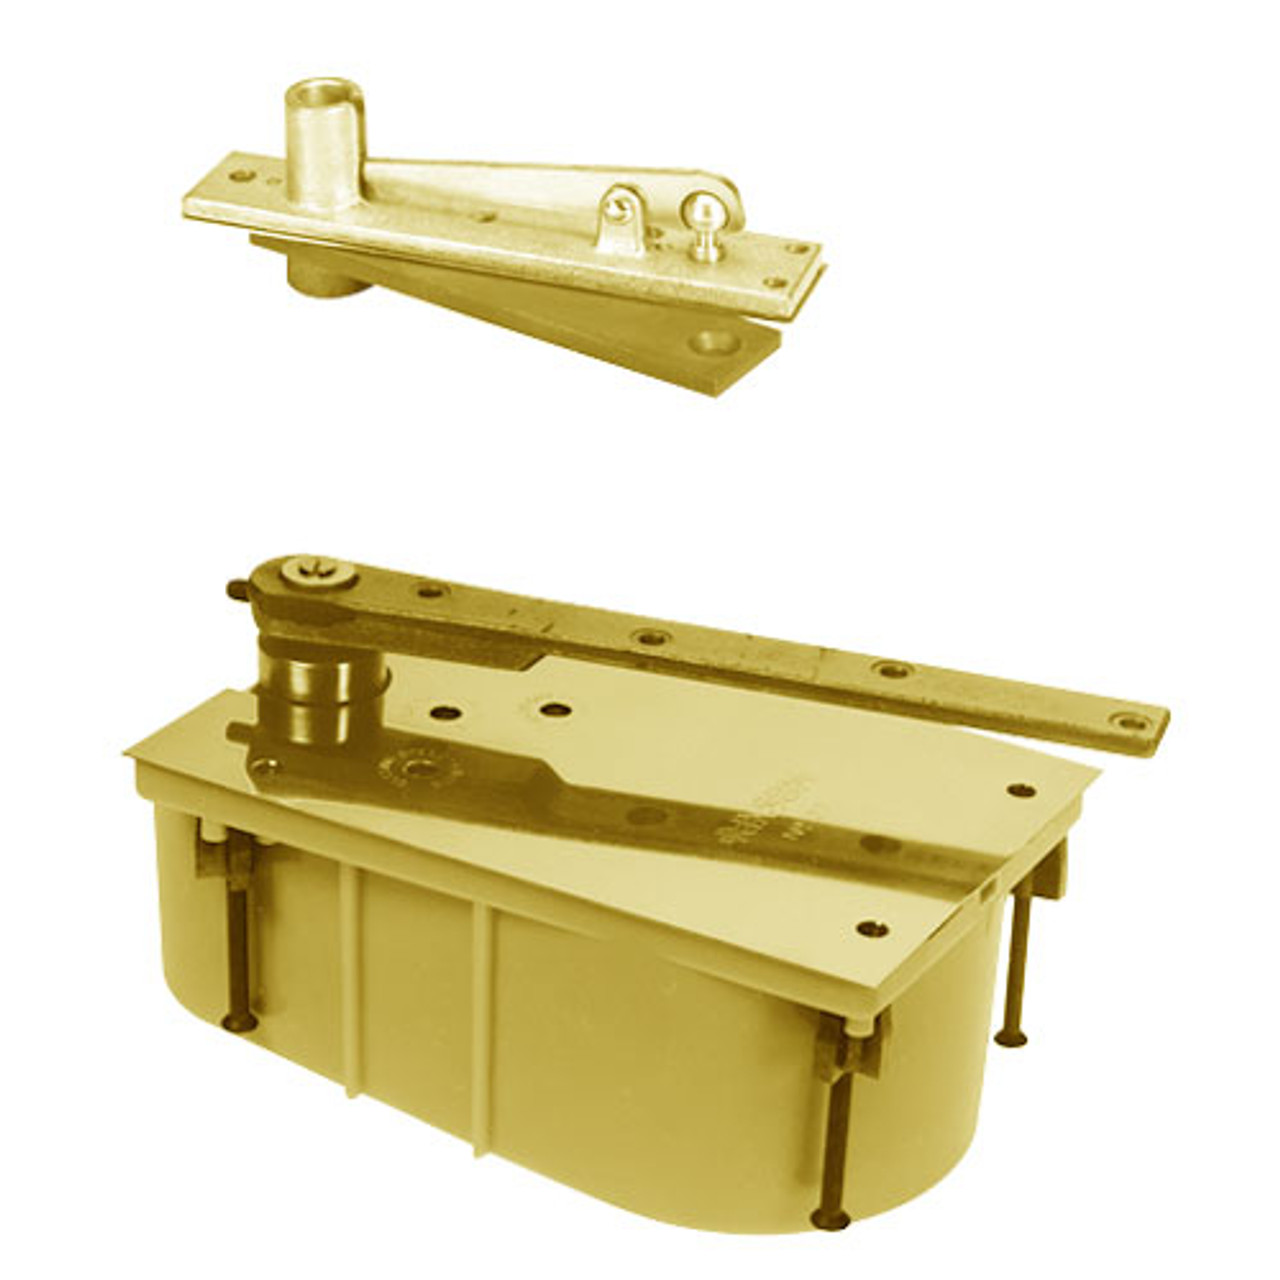 PH28-85S-554-CWF-LH-605 Rixson 28 Series Heavy Duty Single Acting Center Hung Floor Closer with Concealed Arm in Bright Brass Finish